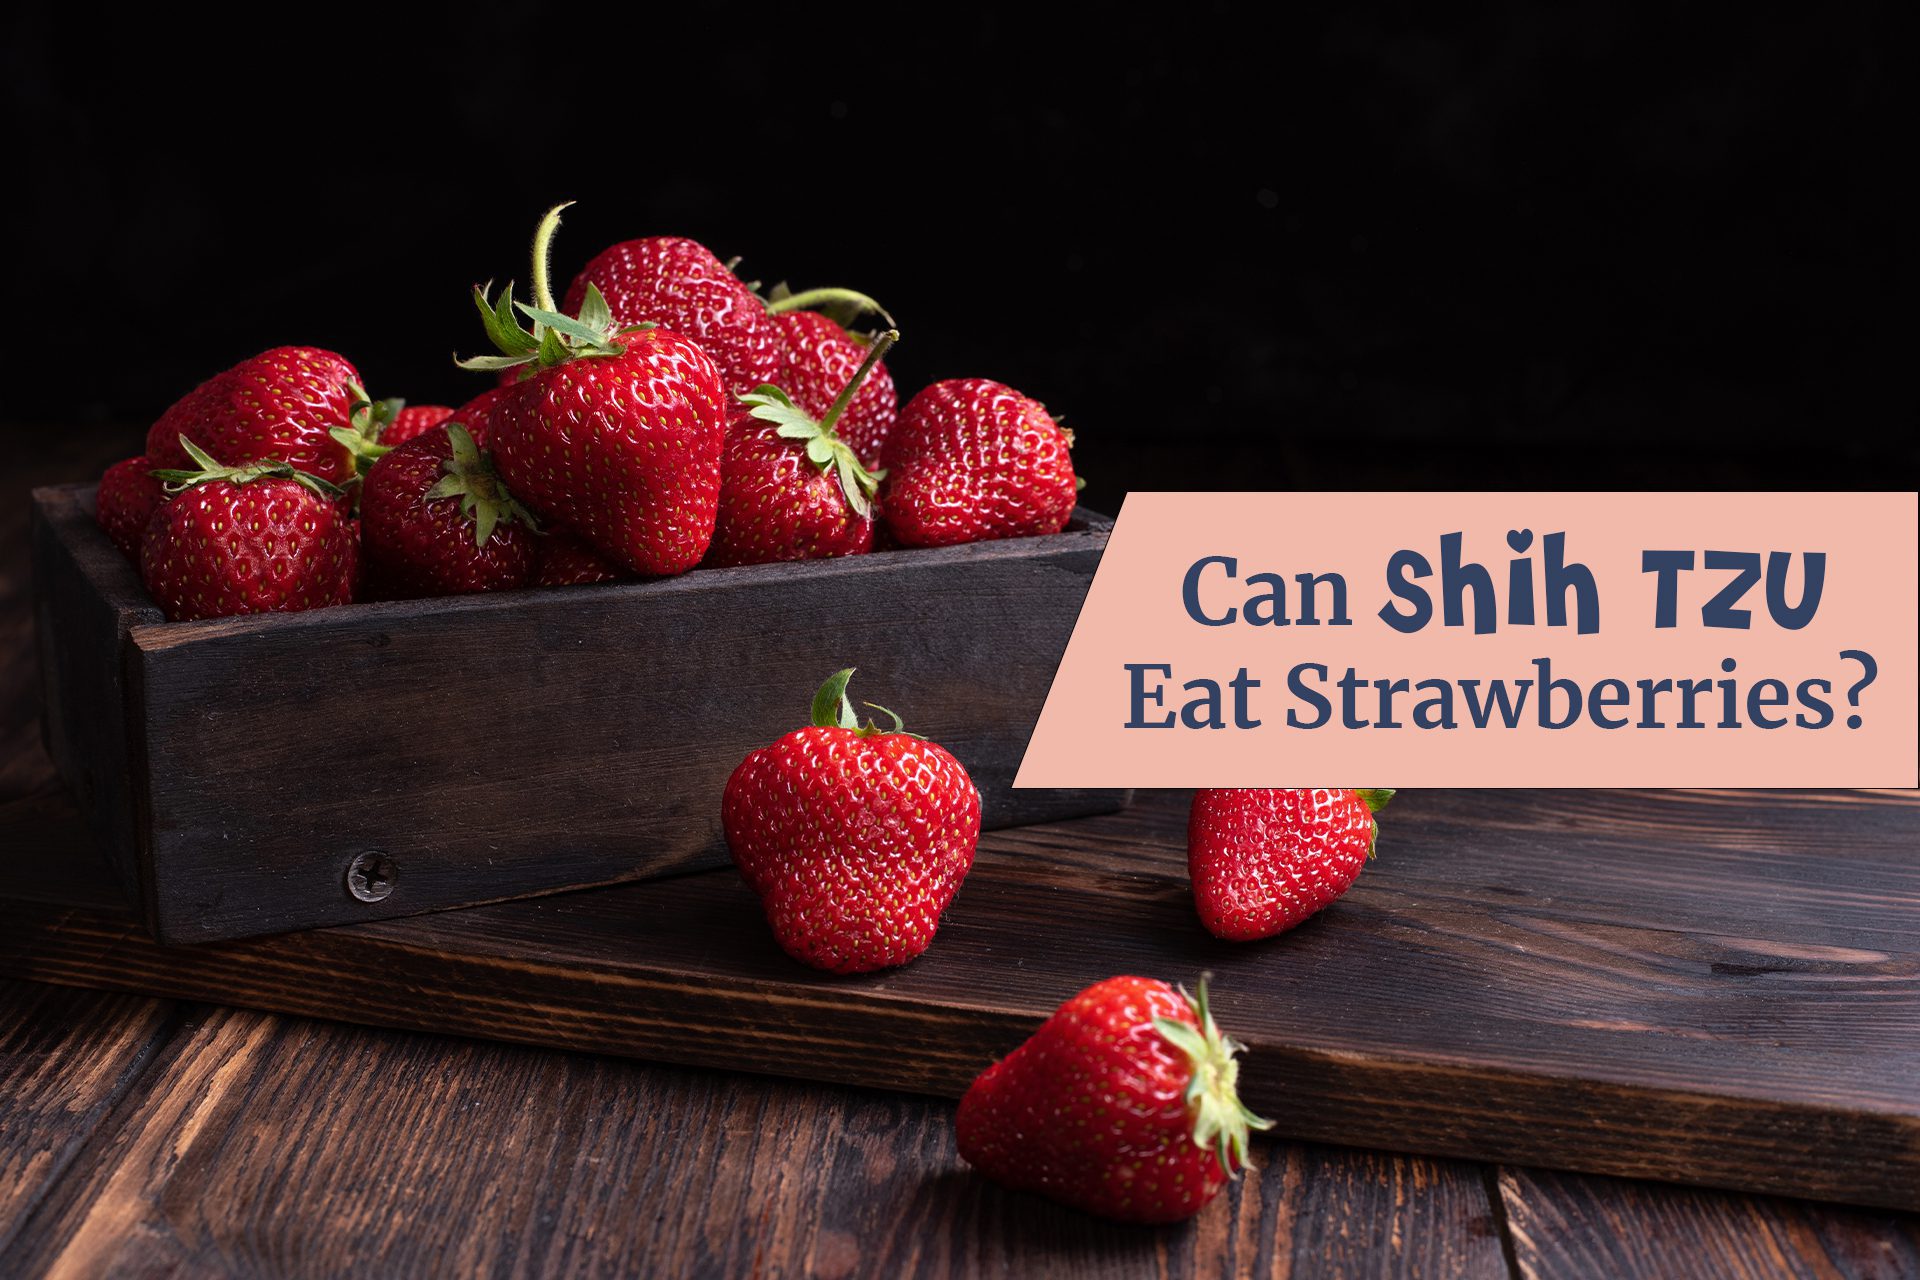 Can Shih Tzu eat strawberries? Shih Tzus are small dogs with big personalities. Strawberries are a delicious and nutritious fruit. However, some people believe that strawberries may be harmful to Shih Tzus. The truth is that strawberries are safe for Shih Tzus to eat in moderation.